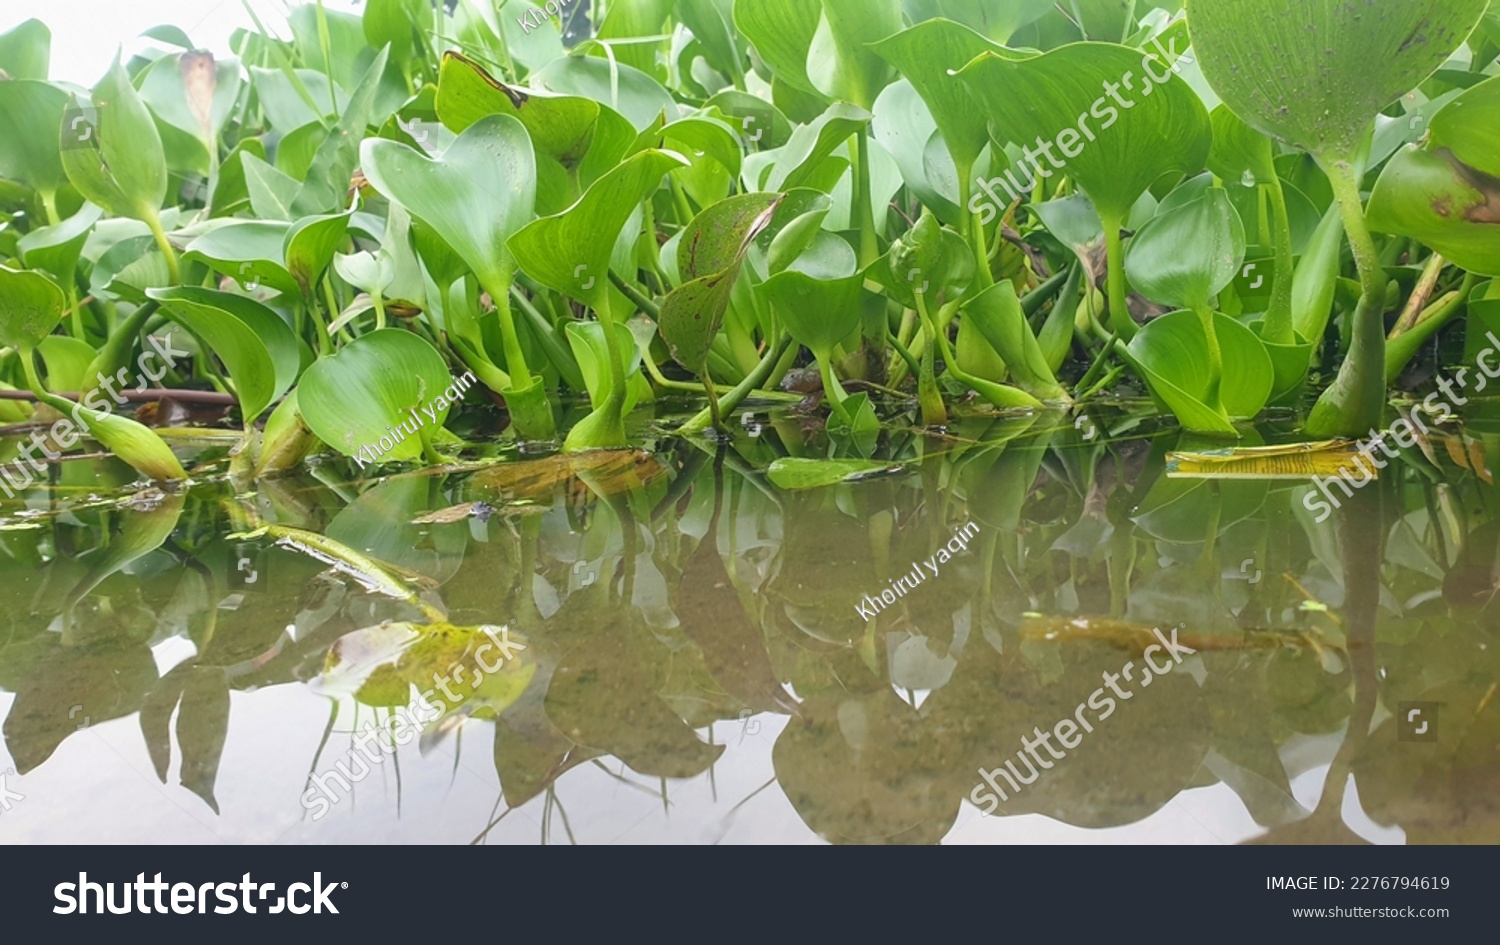 Pontederia crassipes, commonly known as common water hyacinth is an aquatic plant native to South America. Eichhornia crassipes #2276794619